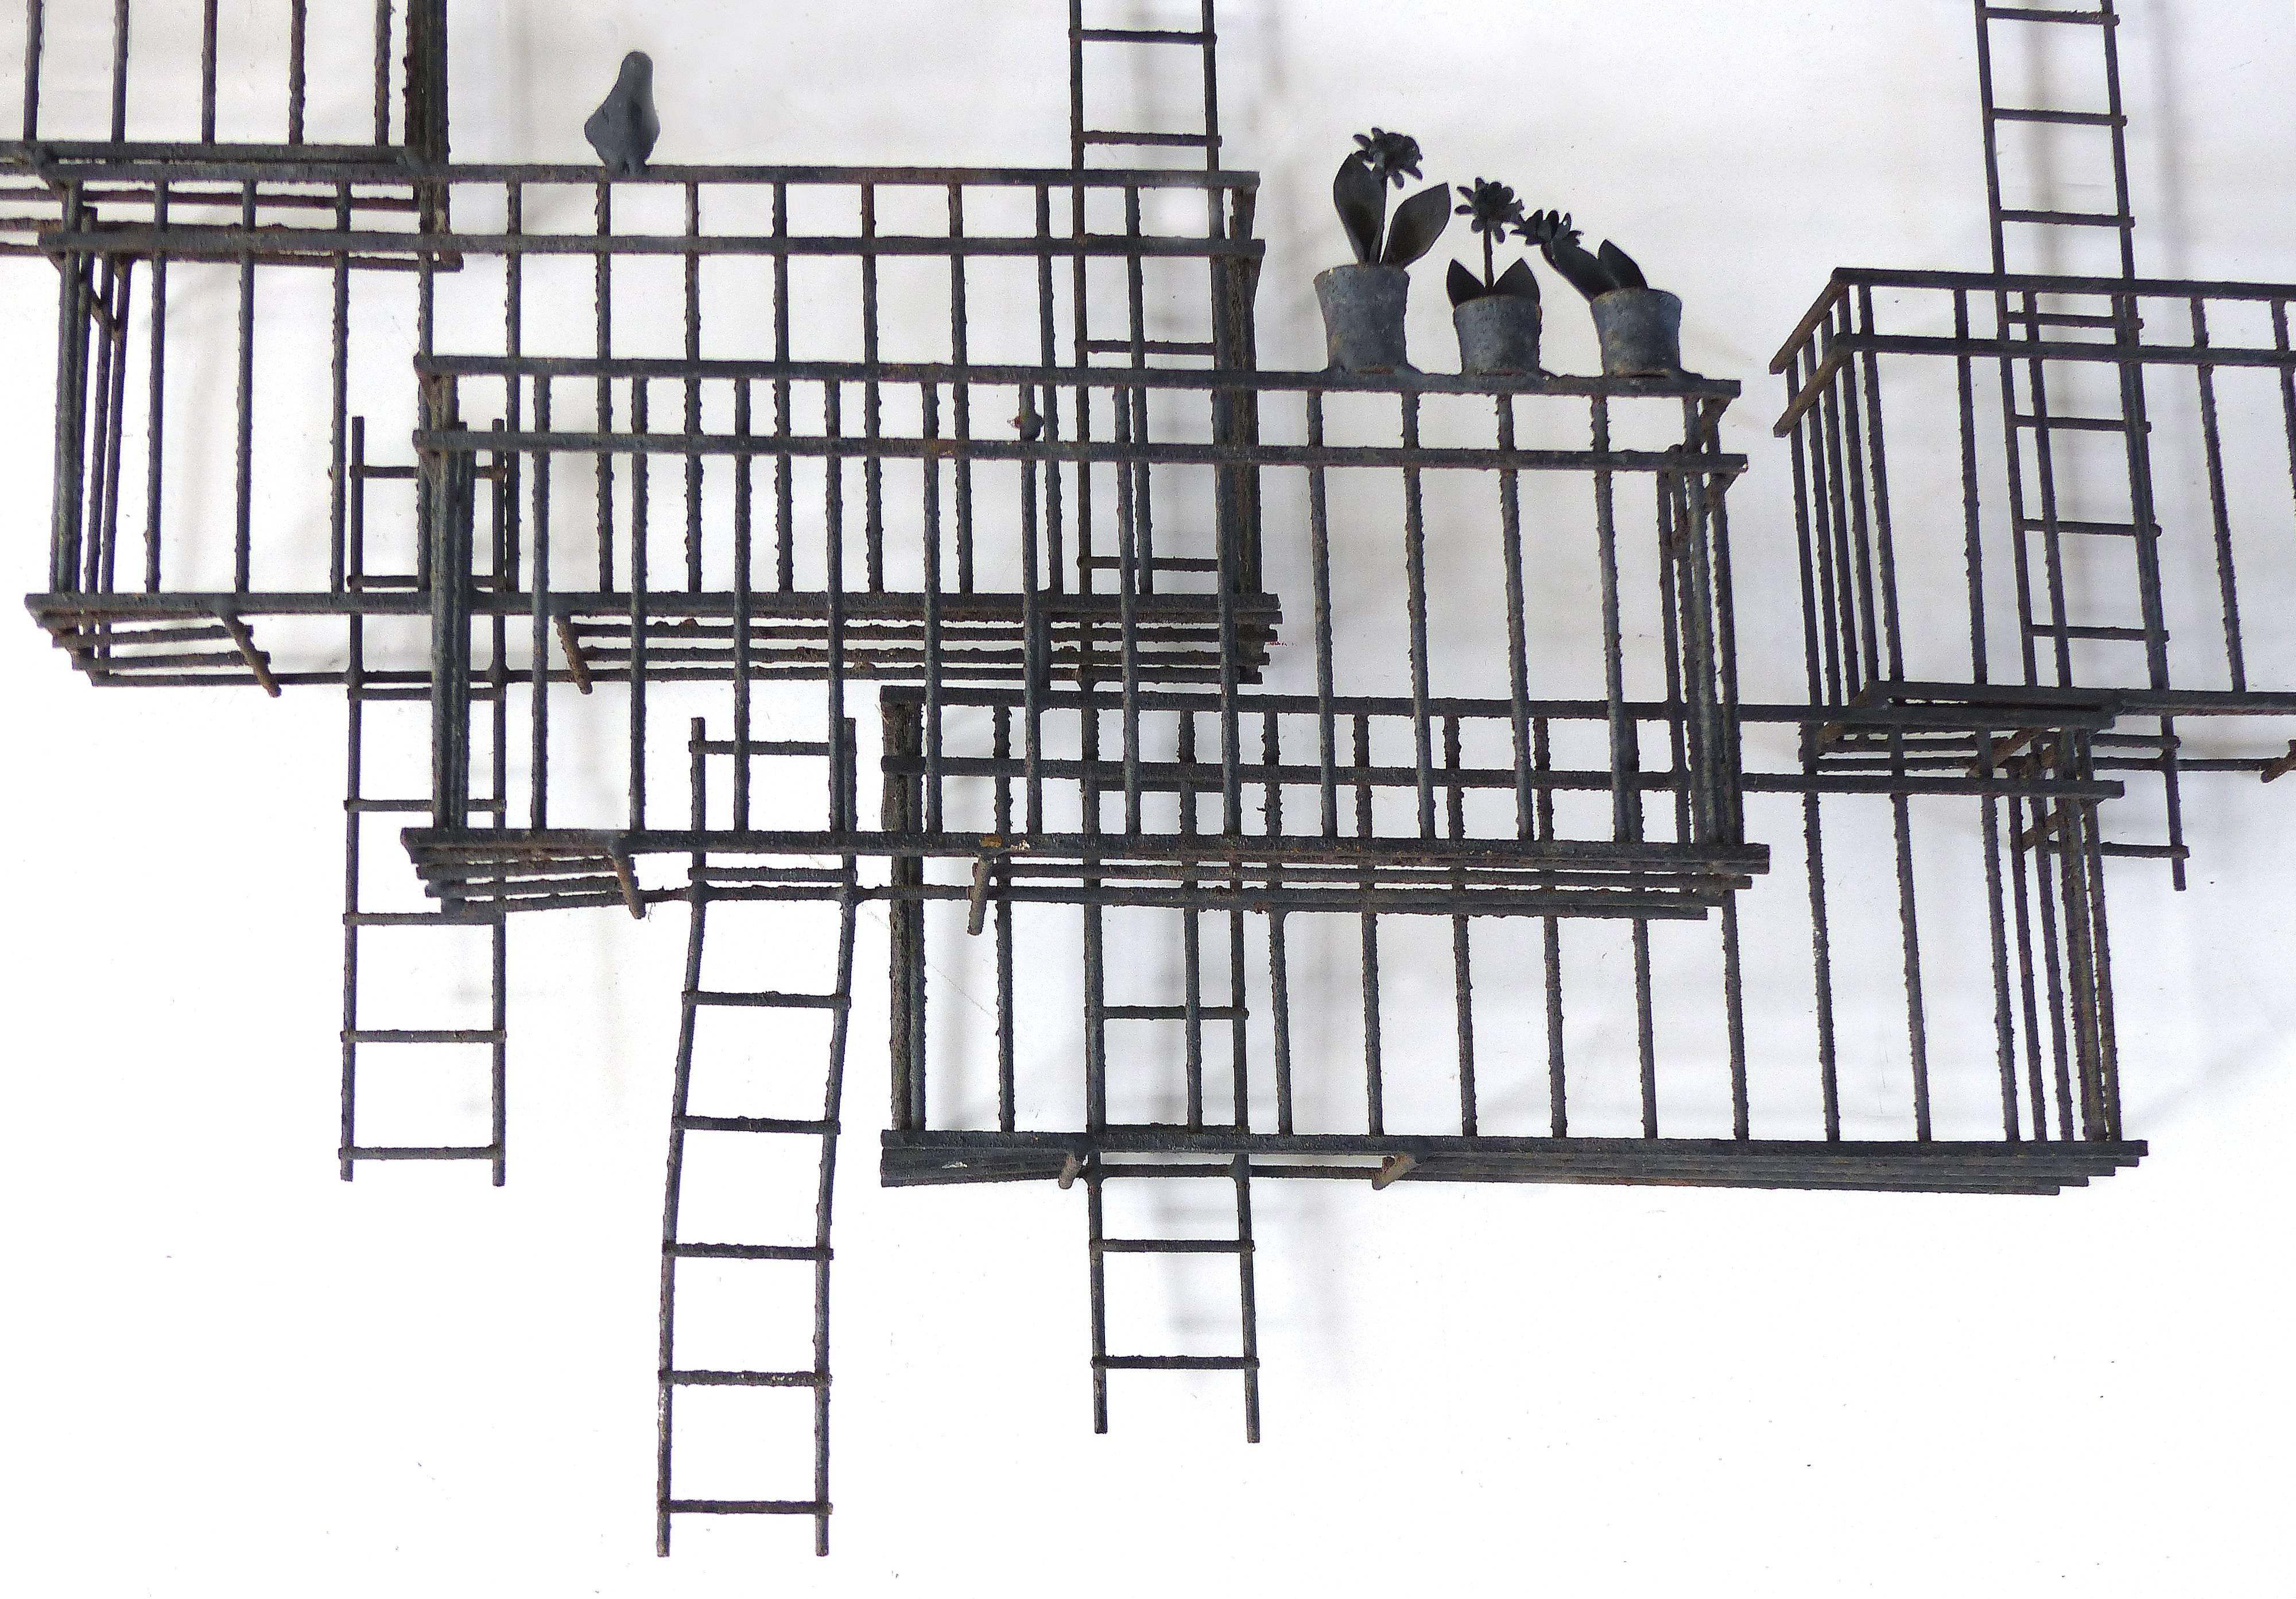 Offered for sale is a large 1970s vintage studio metal wall sculpture created in the style of Ilana Goor. The brutalist sculpture represents cityscape balconies and fire escapes with birds and potted plants. The sculpture has great movement and